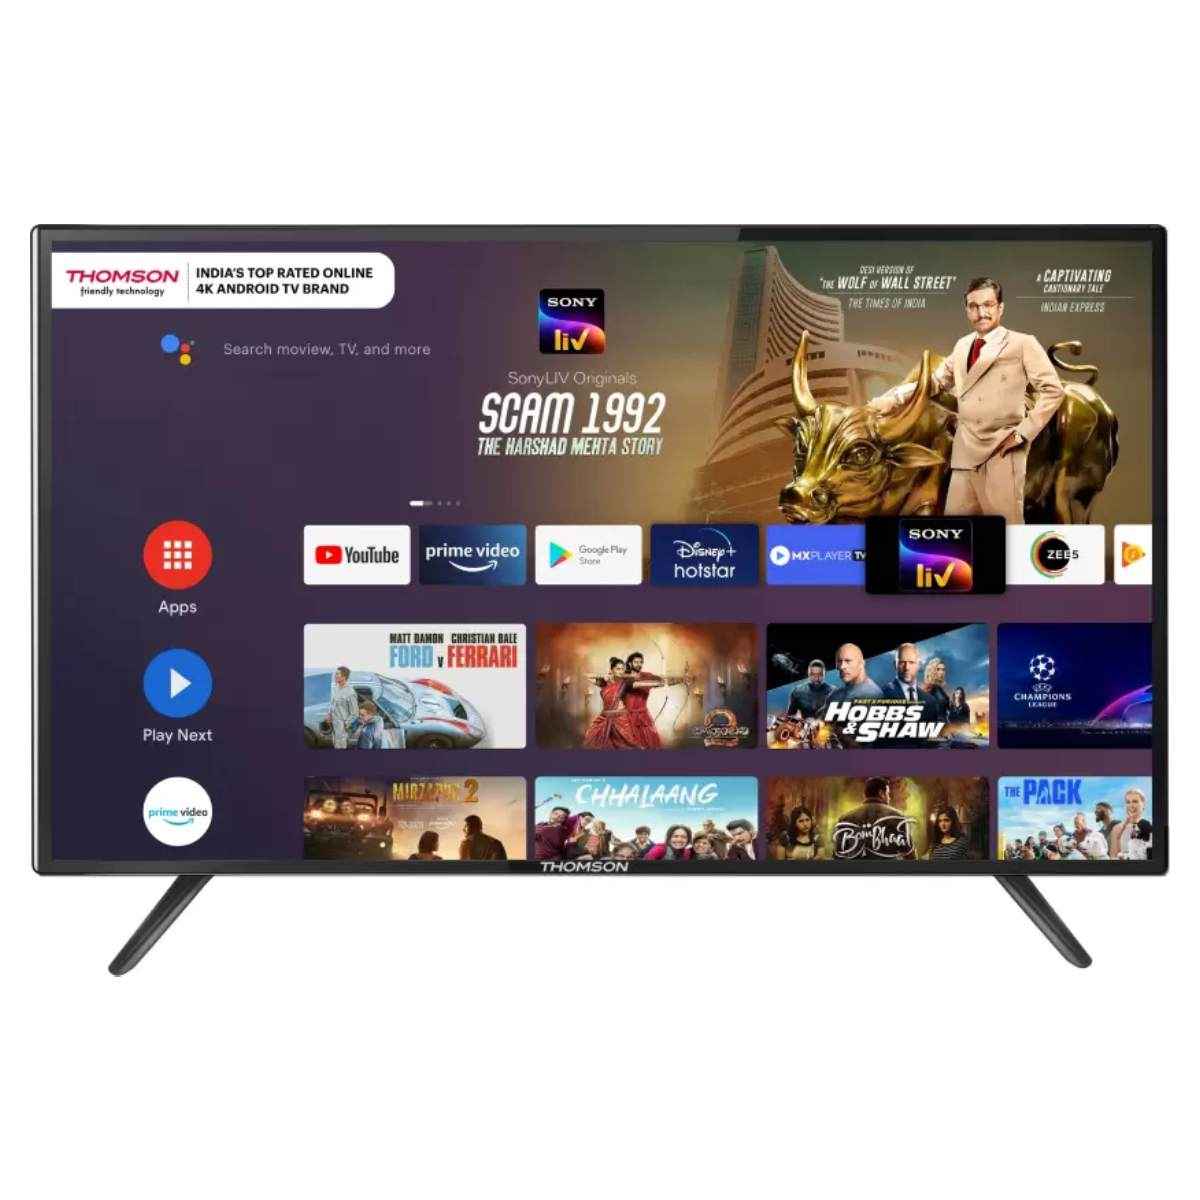 Thomson 9R Series 55 inch 4K LED Android TV(55PATH5050) TV Price in India, Specification, Features | Digit.in